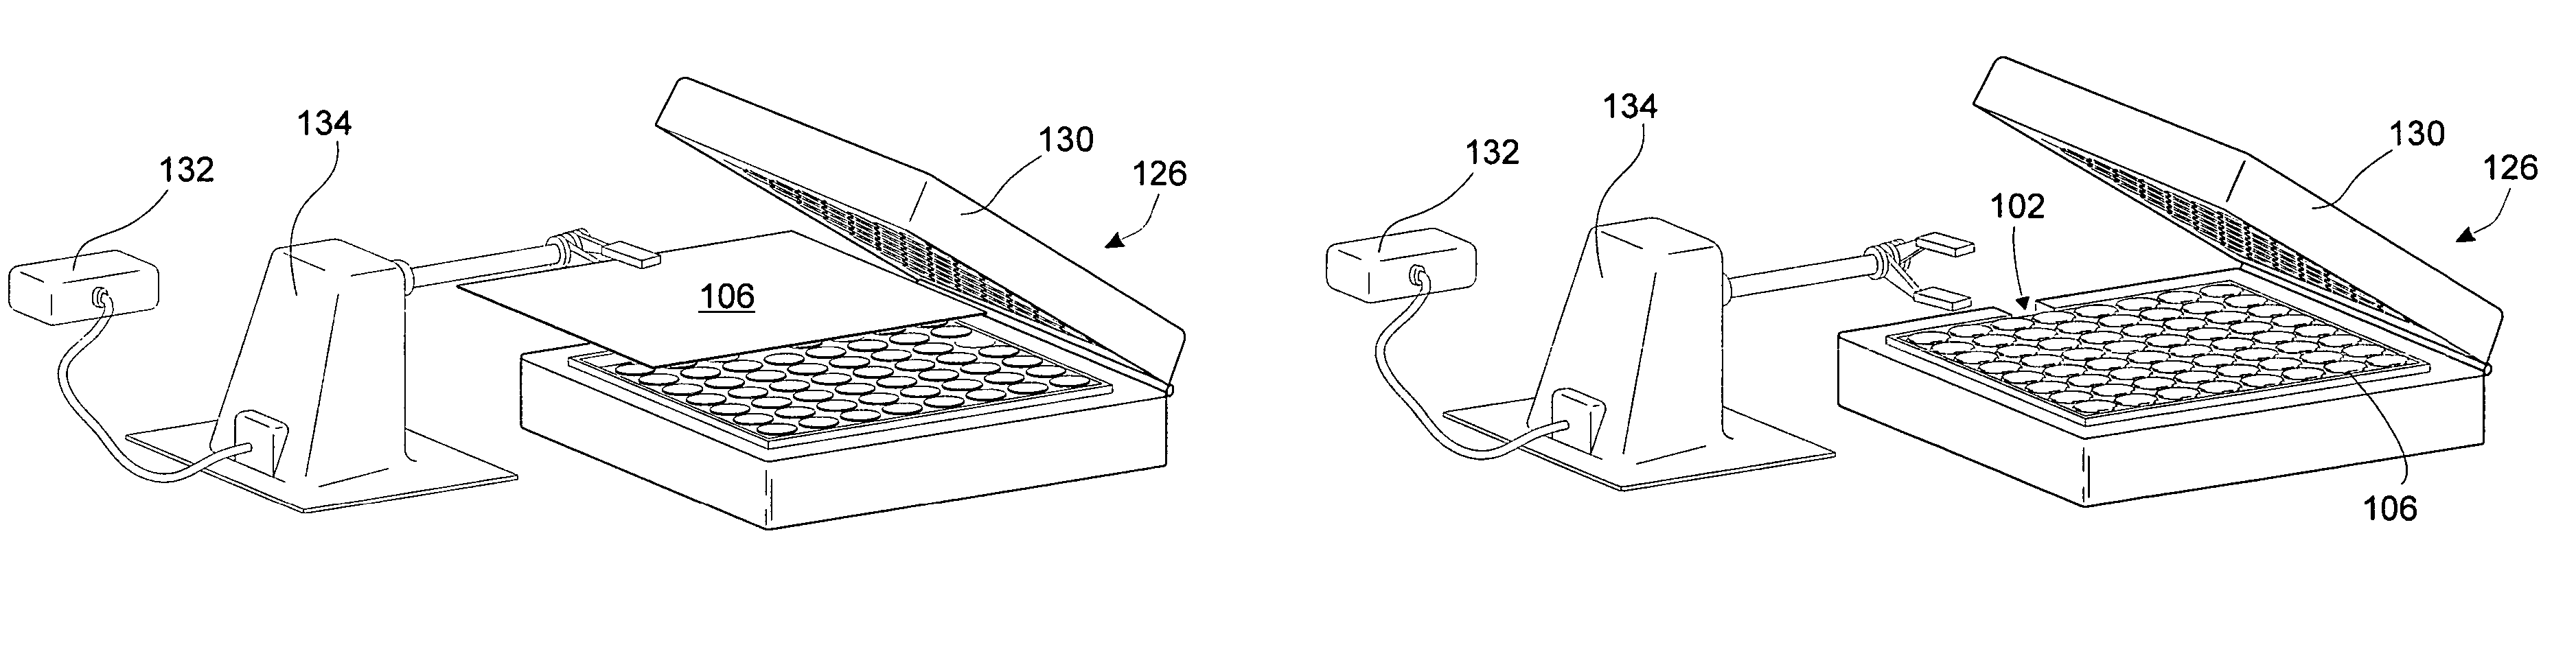 Method of making a modular floor tile system with transition edge